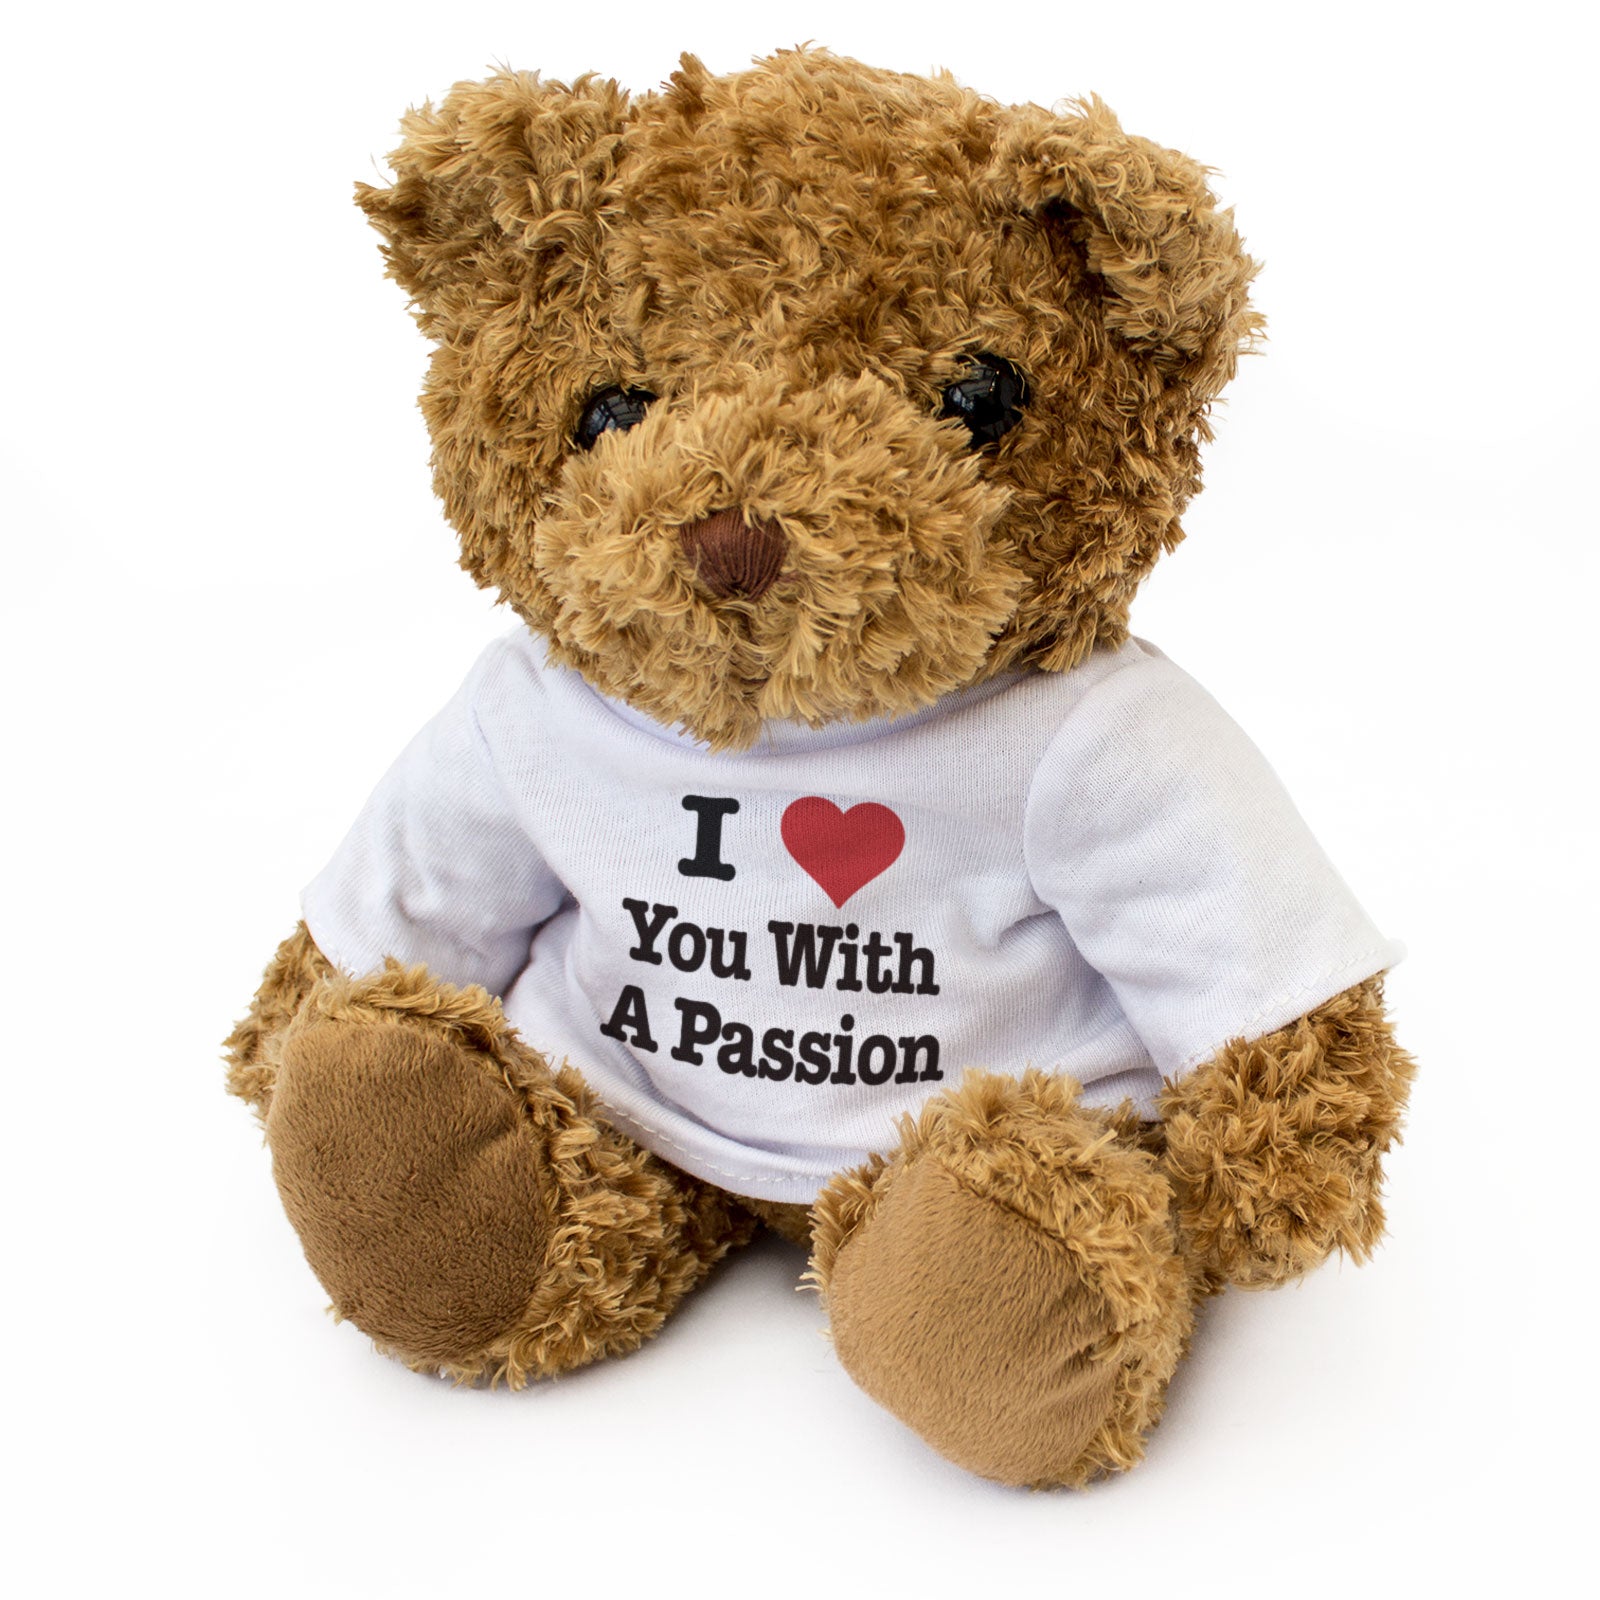 I Love You With A Passion - Teddy Bear